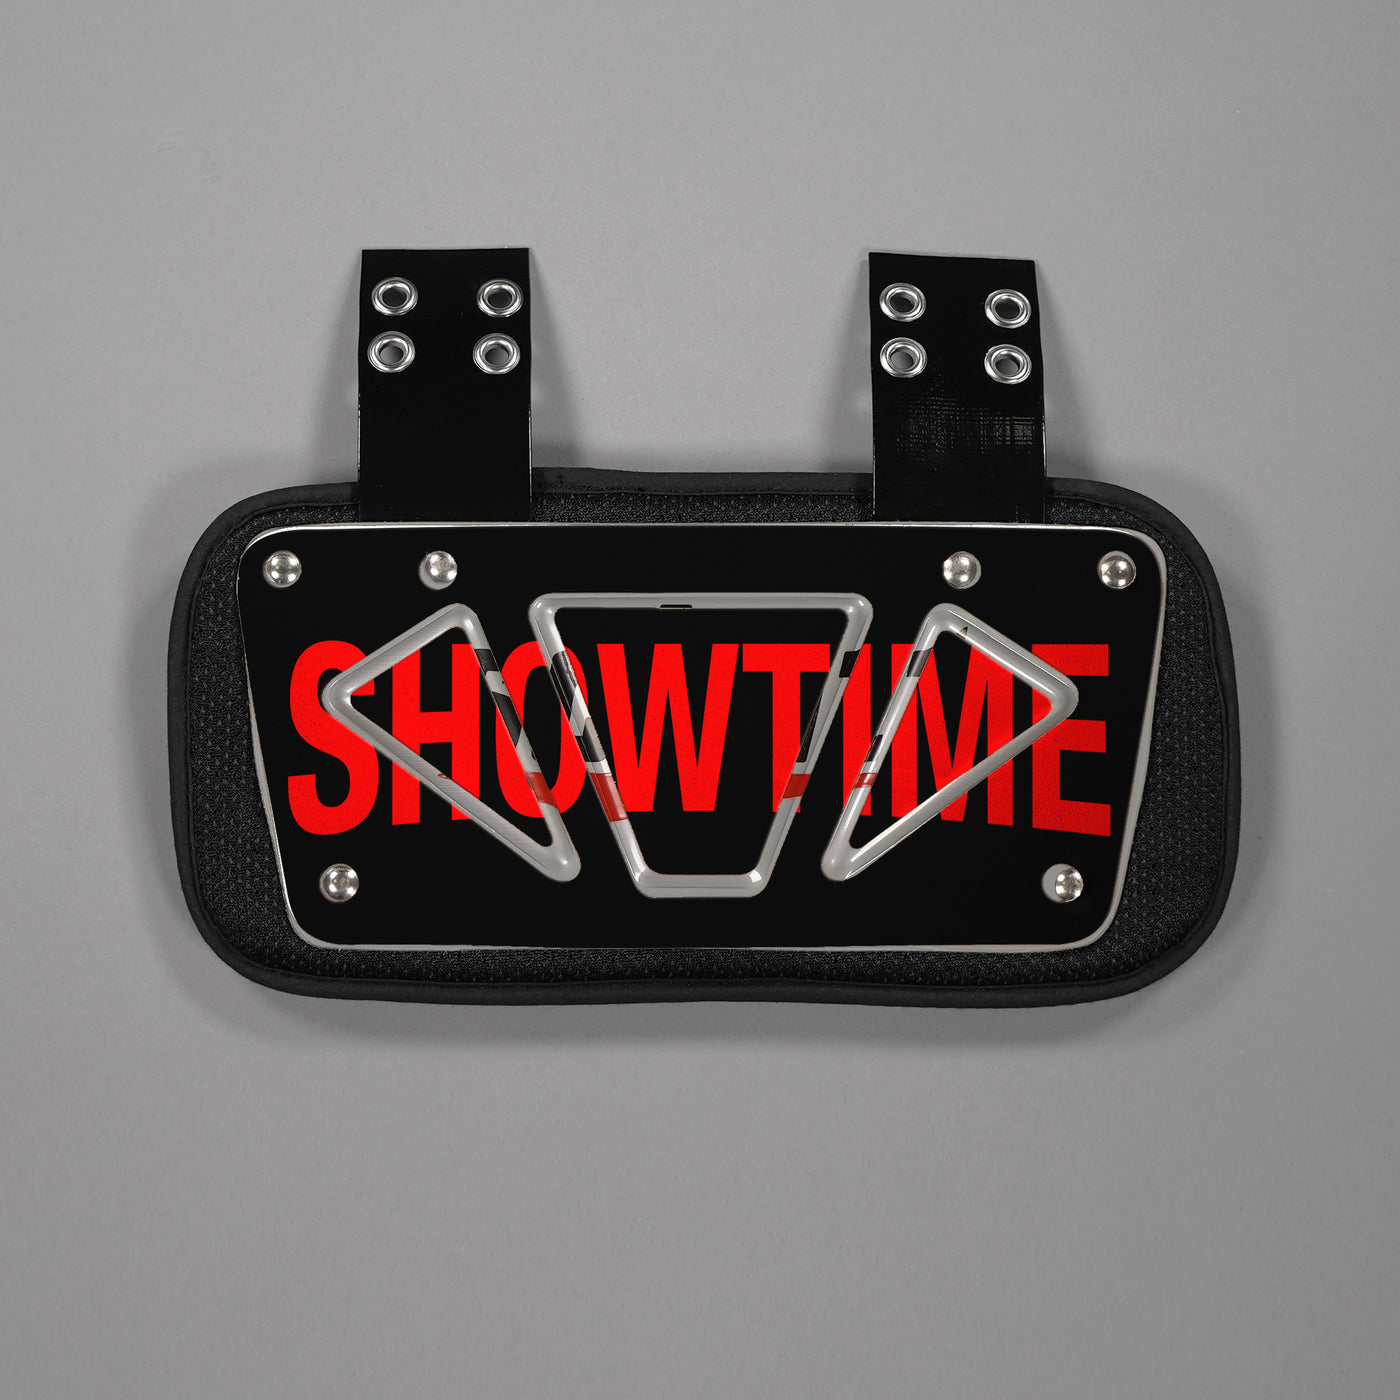 Showtime Black Sticker for Back Plate